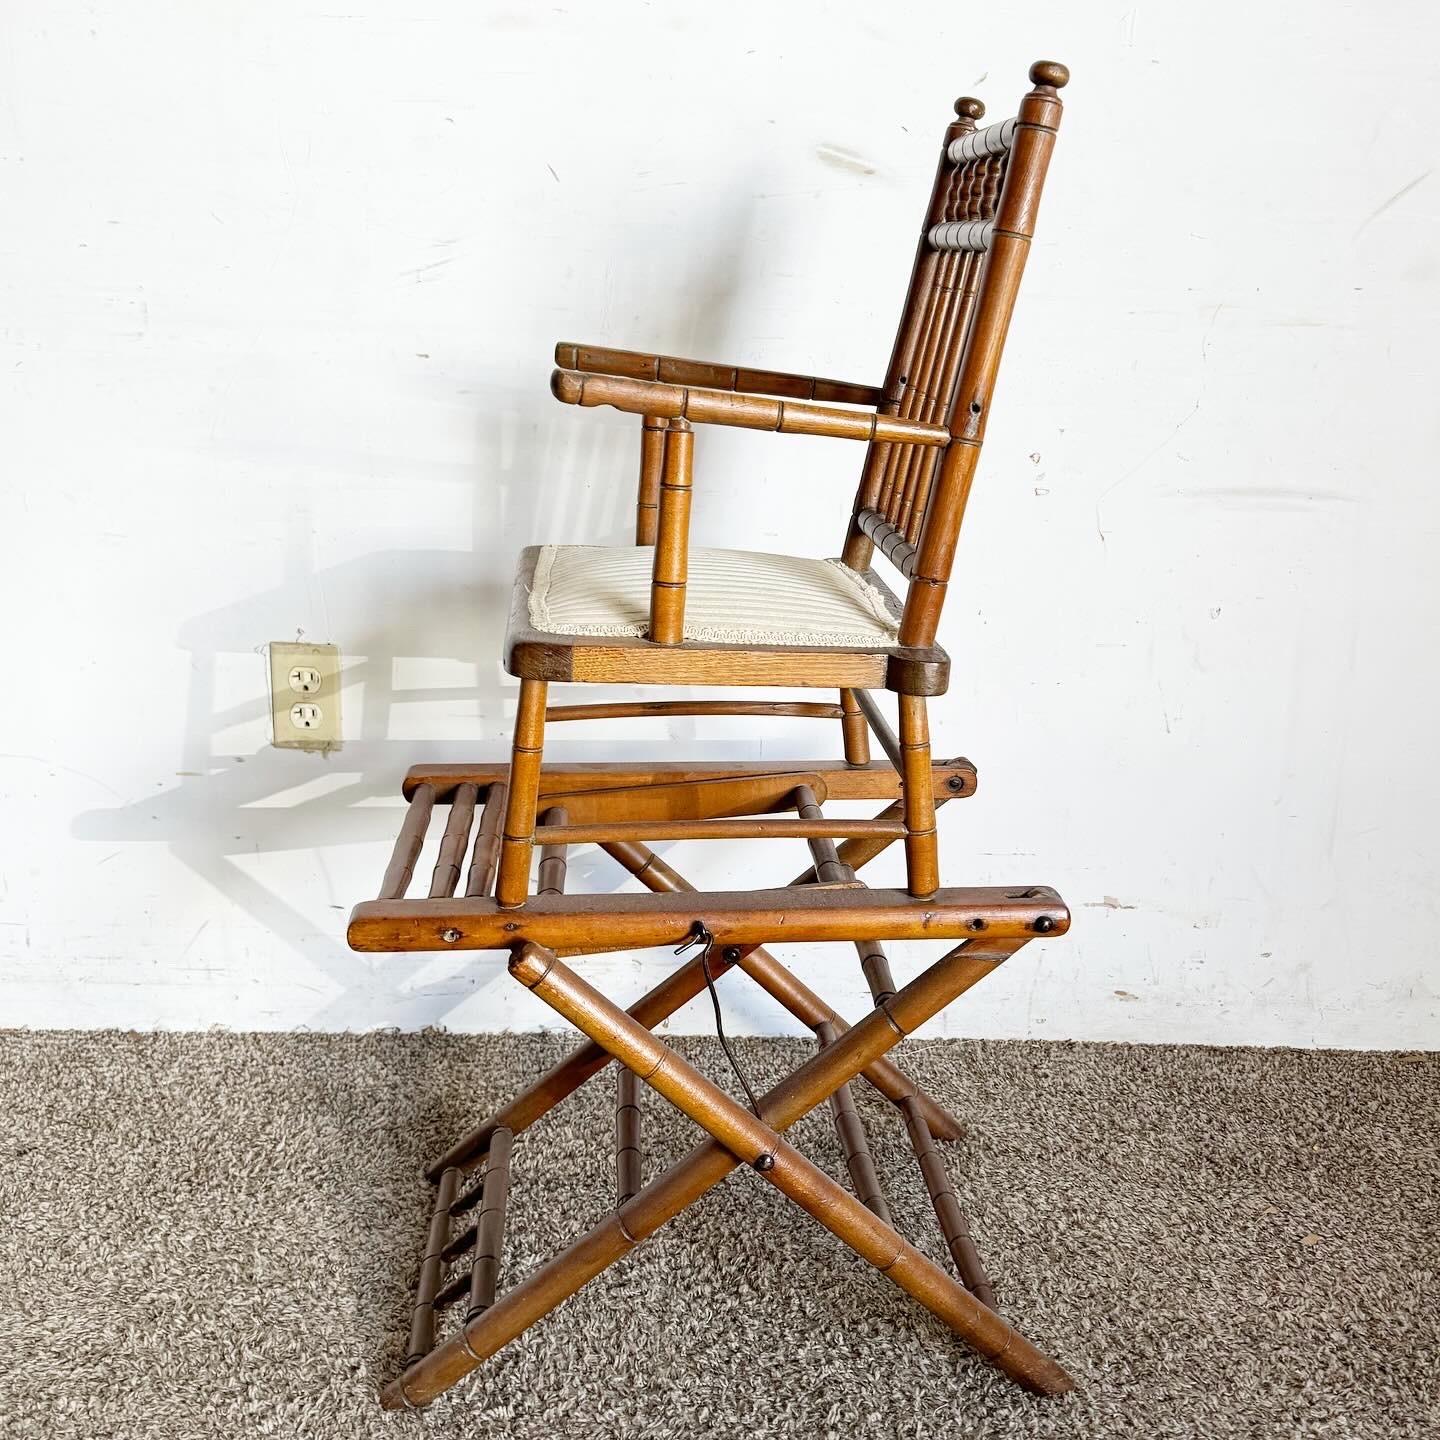 American Antique Wooden Folding High Chair